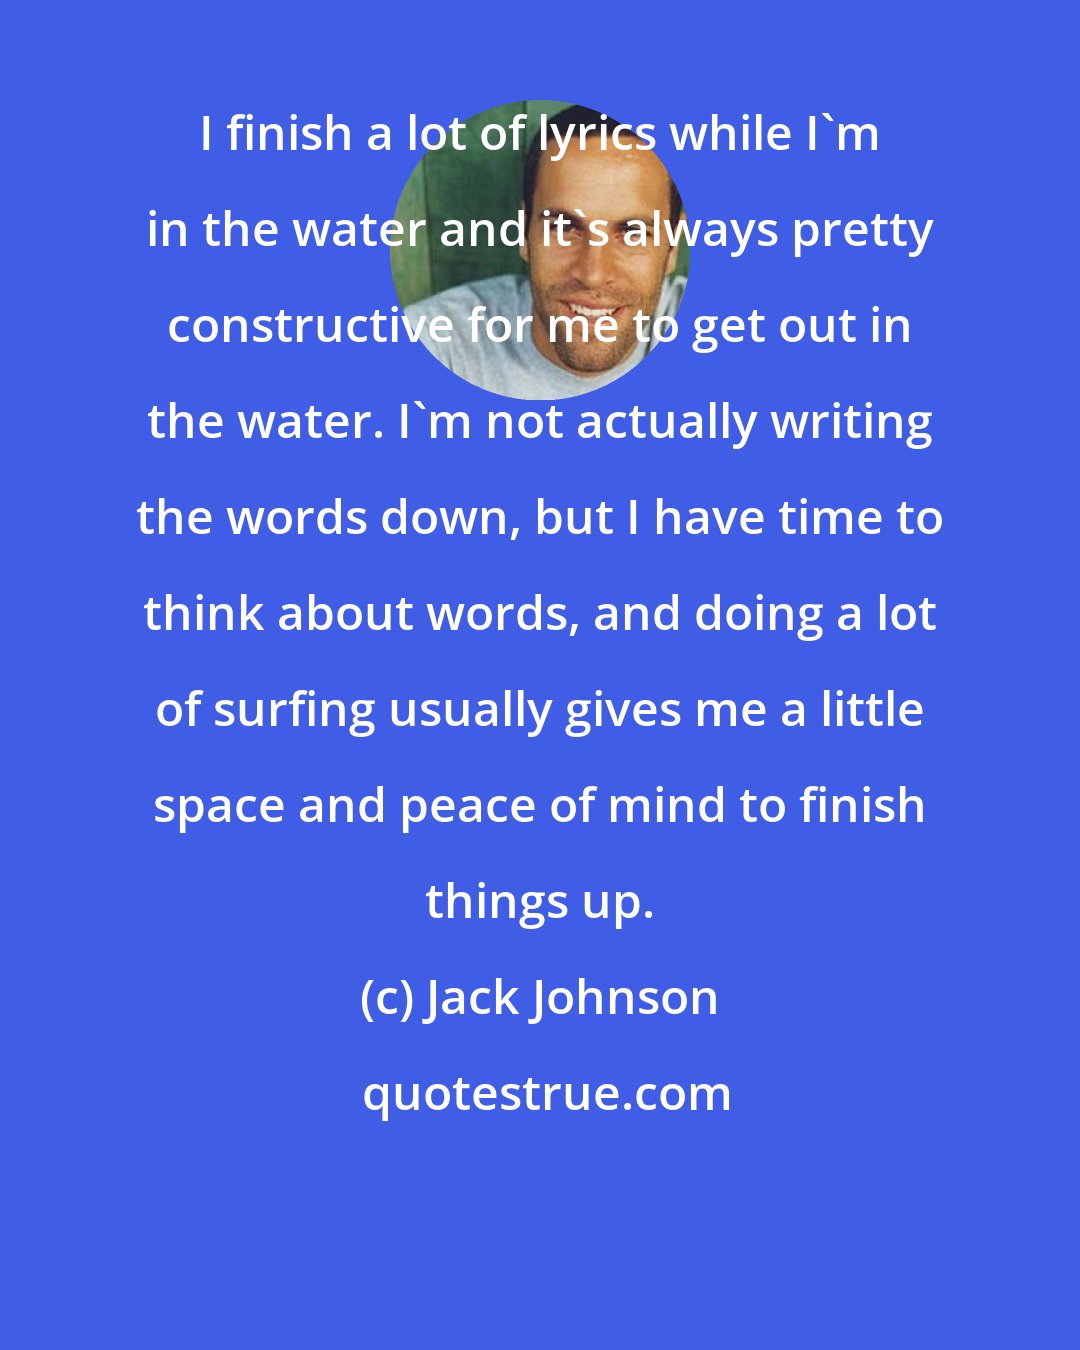 Jack Johnson: I finish a lot of lyrics while I'm in the water and it's always pretty constructive for me to get out in the water. I'm not actually writing the words down, but I have time to think about words, and doing a lot of surfing usually gives me a little space and peace of mind to finish things up.